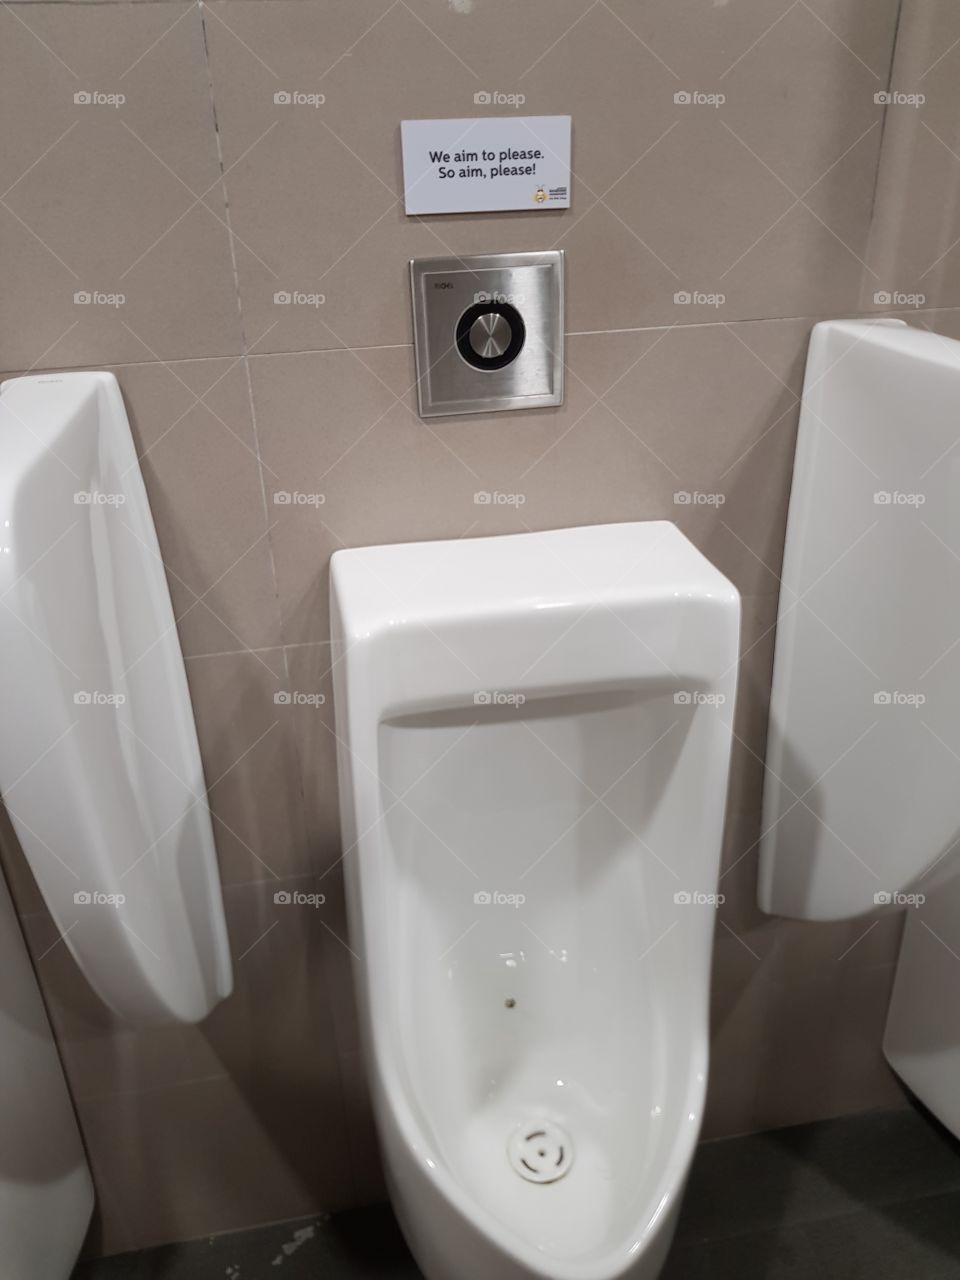 Urinal at a public bathroom with a cheeky sign reminding users to aim